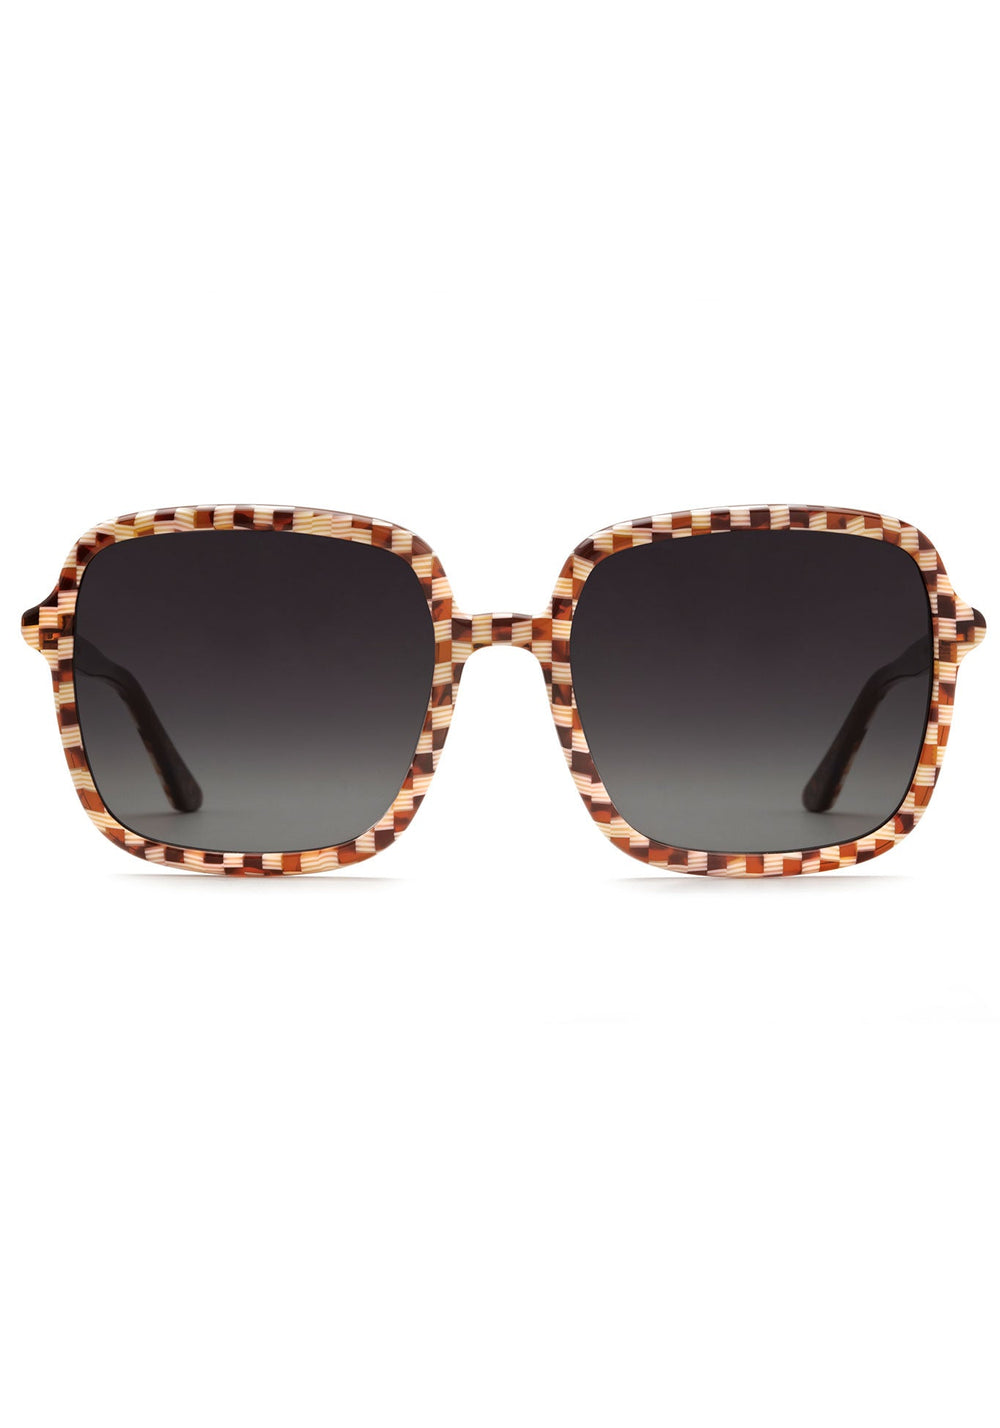 KREWE MARGOT | Caffe Dolce Hancrafted, Luxury Checkered Acetate Sunglasses